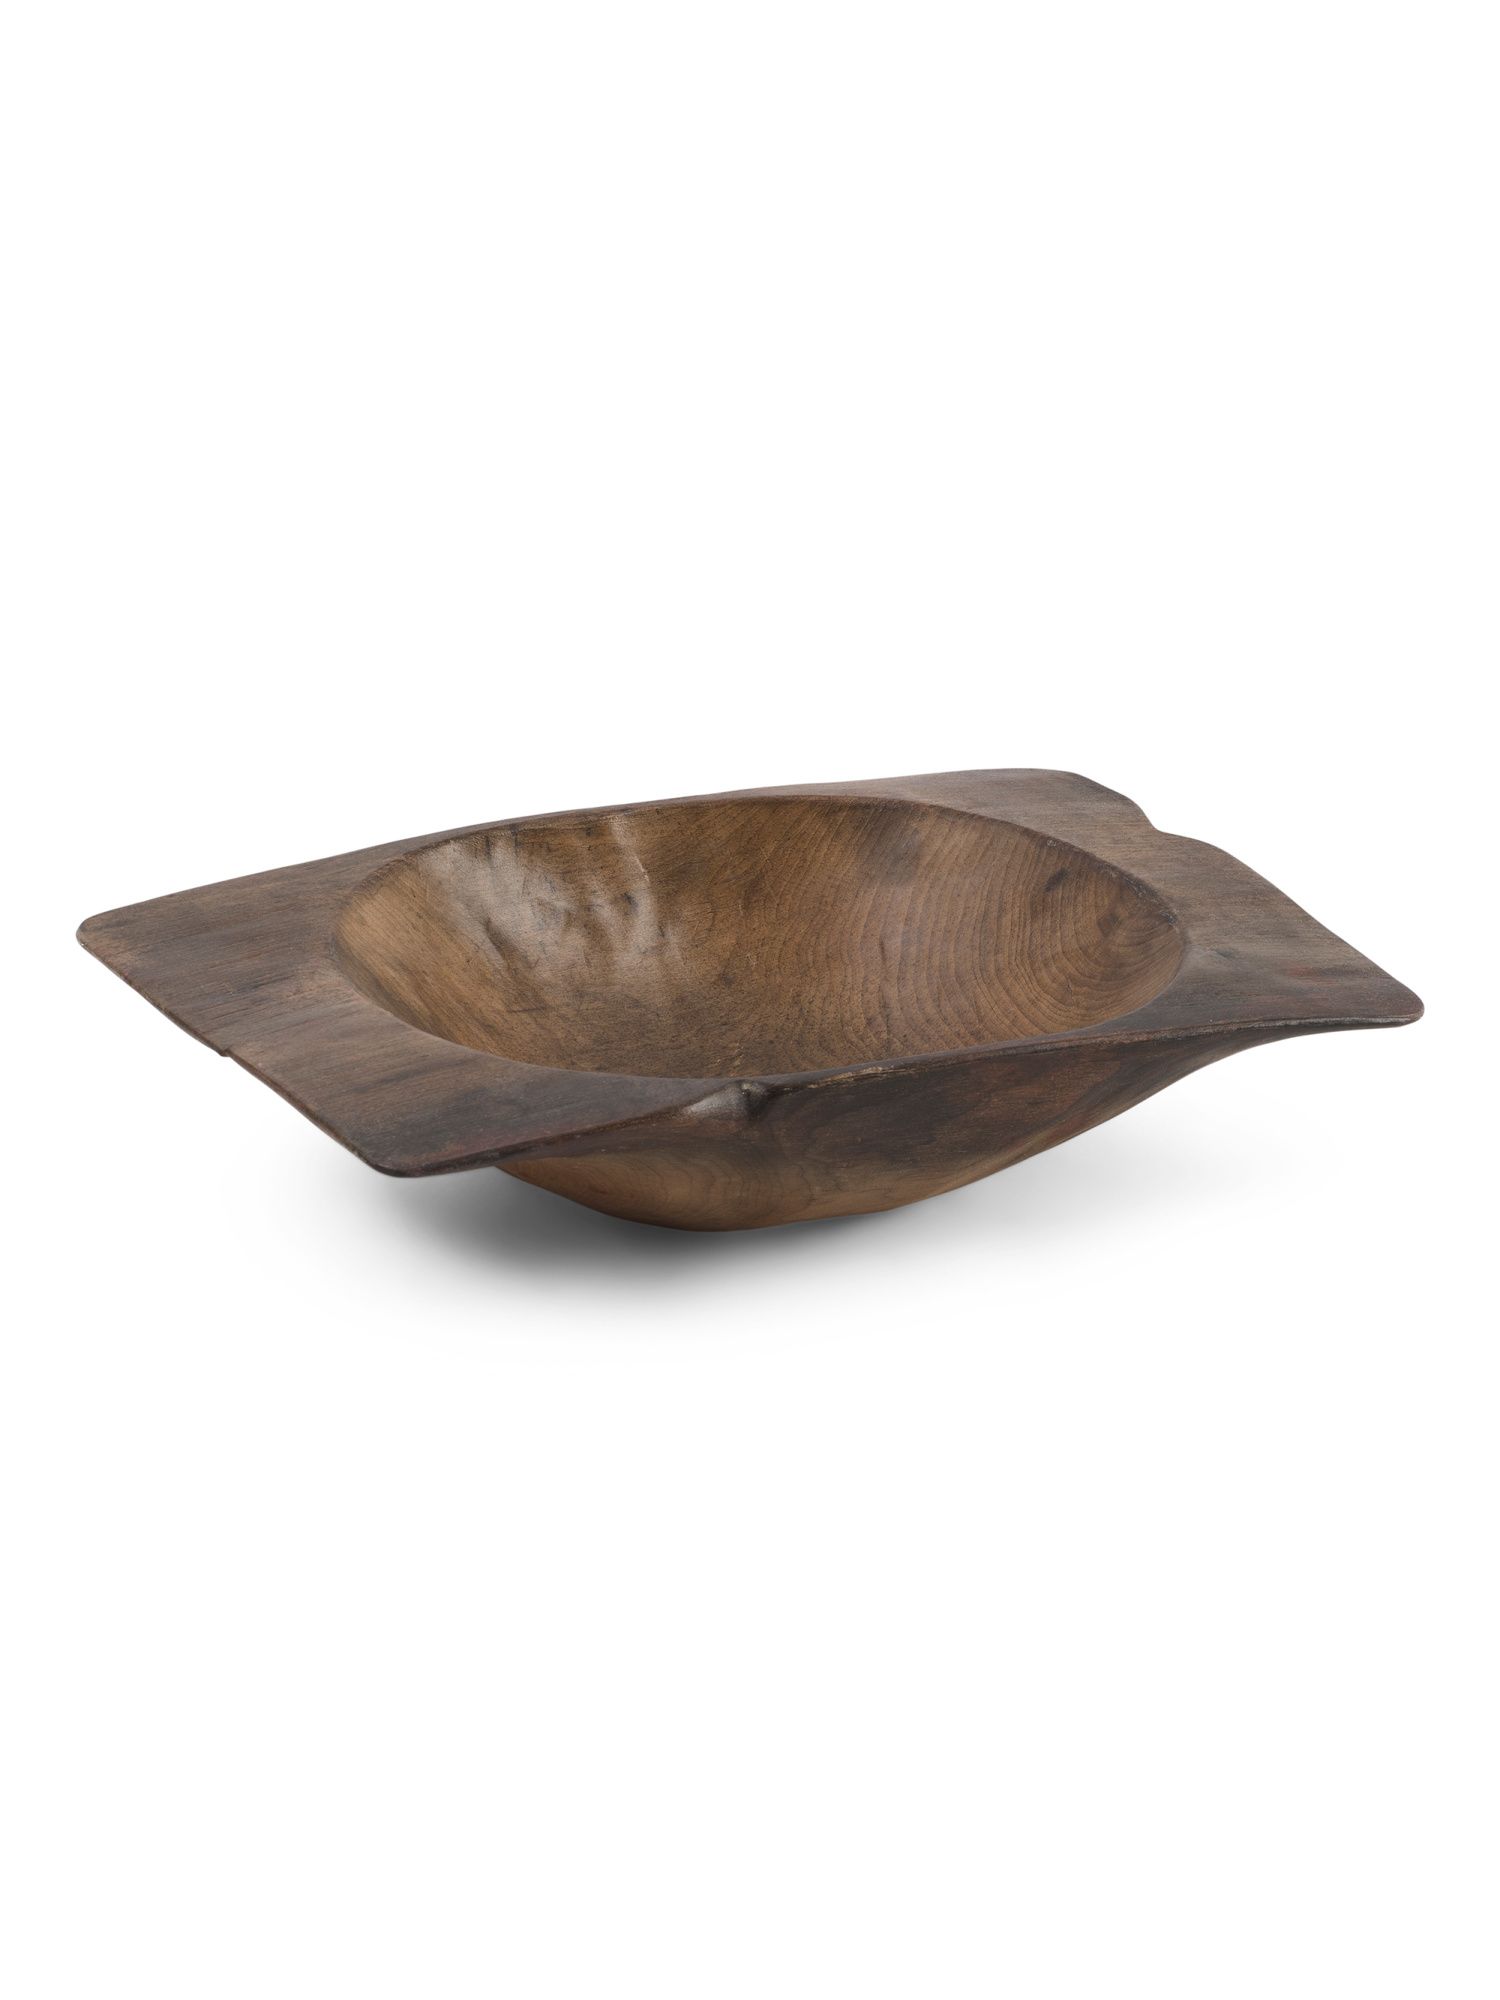 Made In Hungary Saddle Wooden Dough Bowl | TJ Maxx